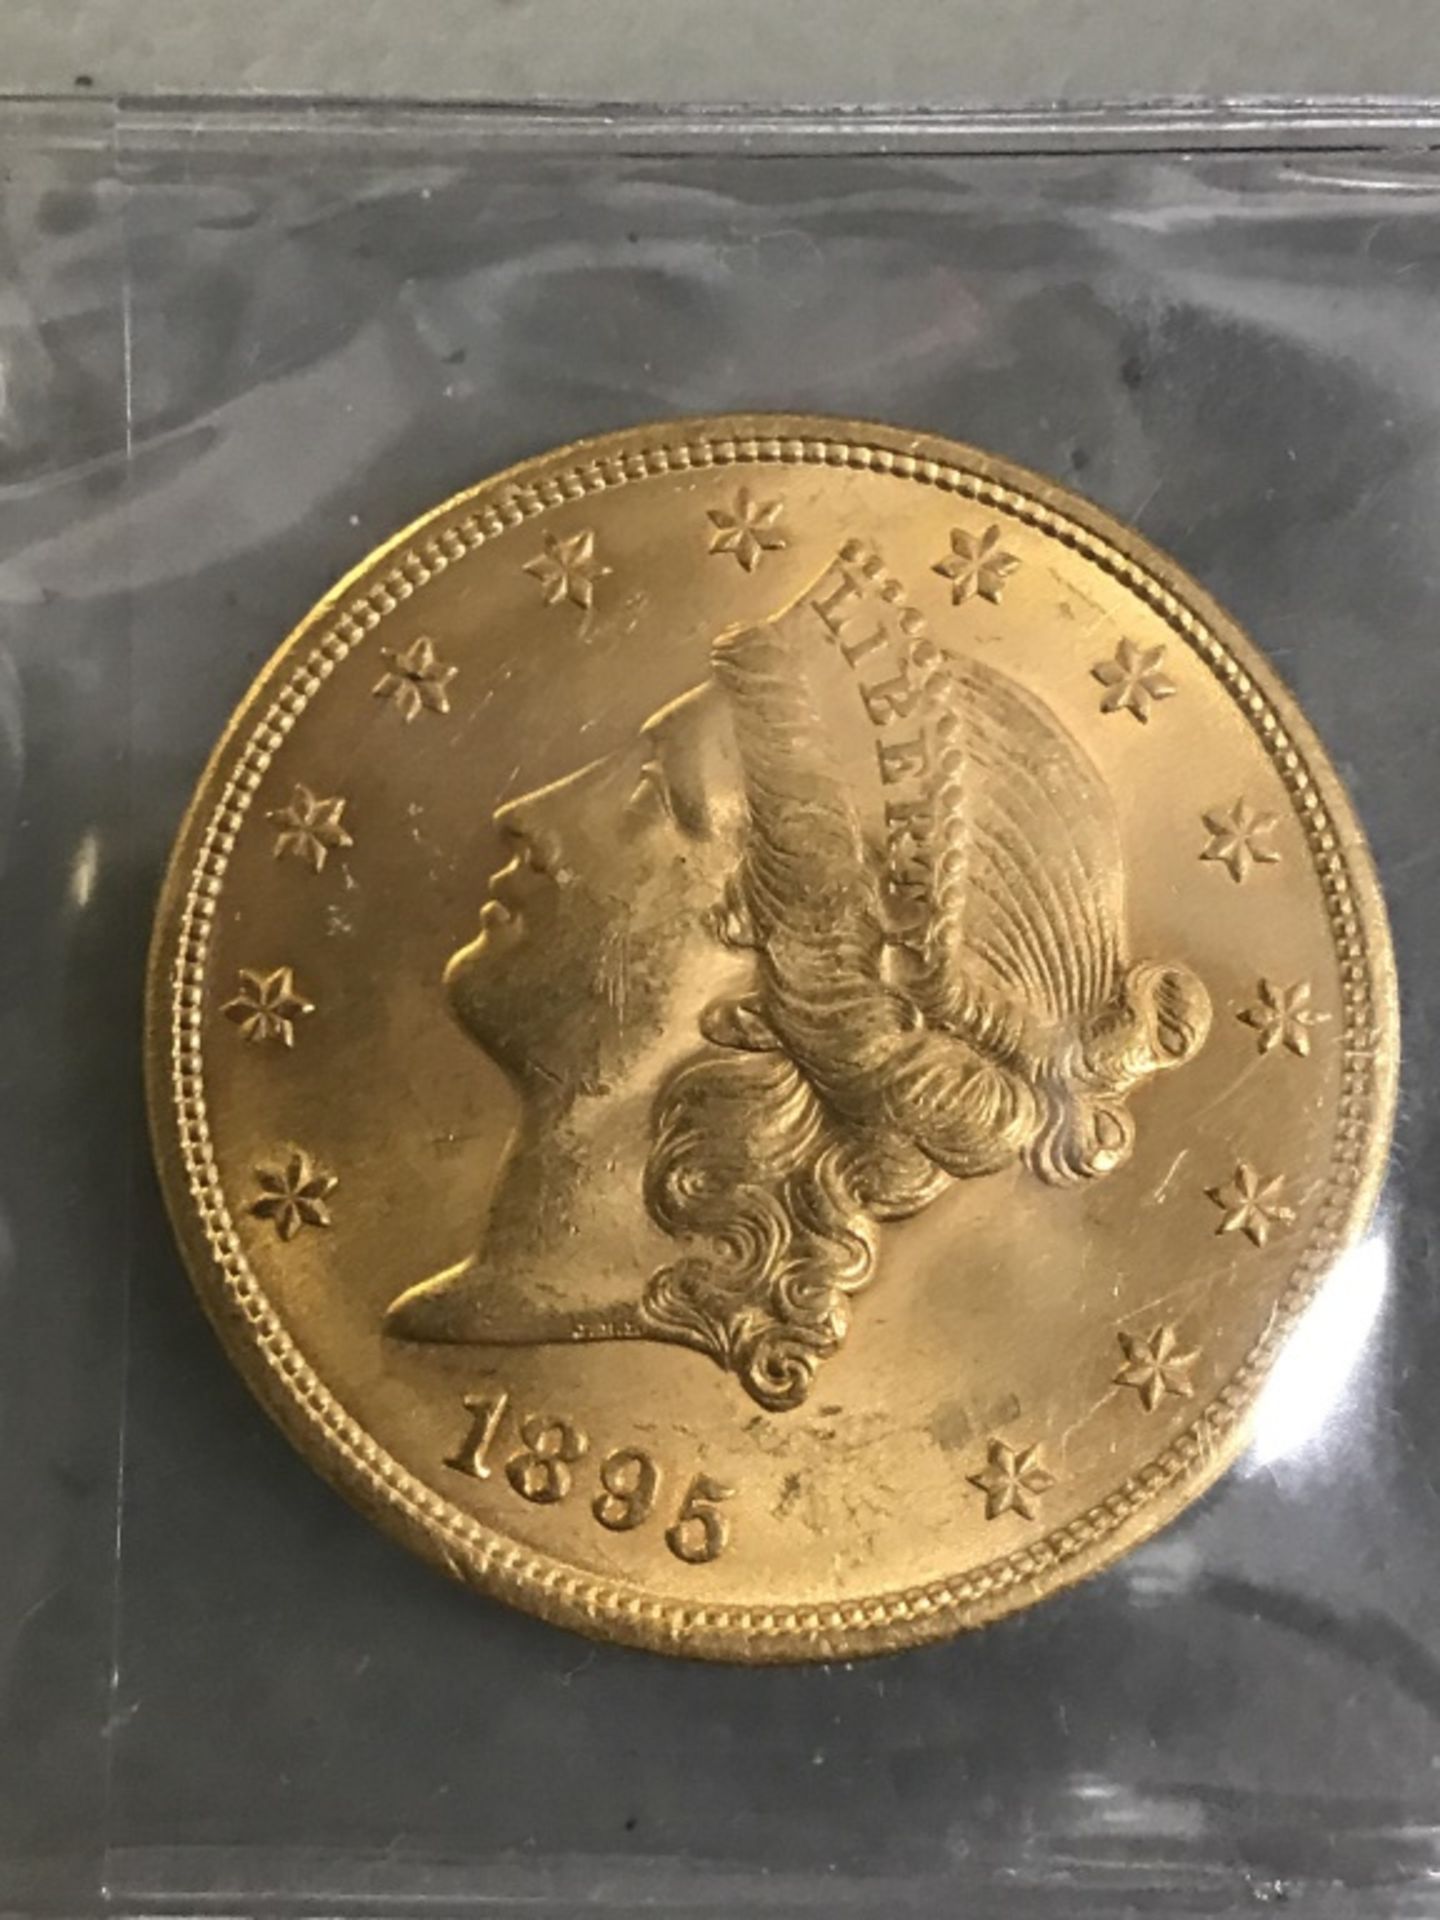 $20 US Gold 1895 Coin - Image 5 of 9